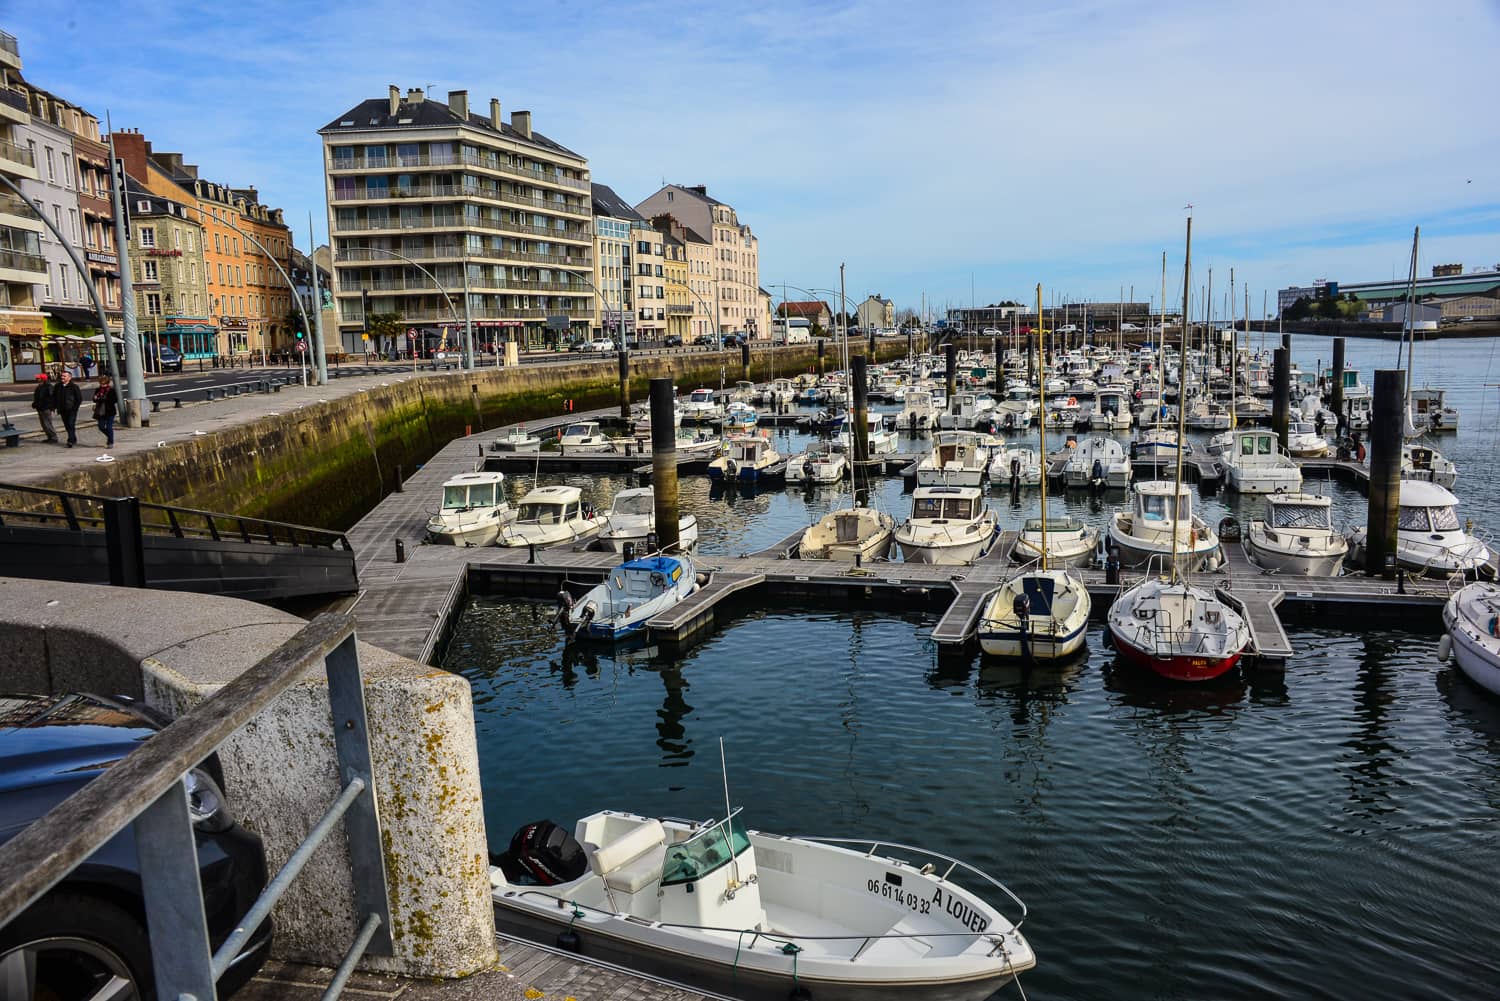 Lots of small boats in the inner harbour of Cherbourg